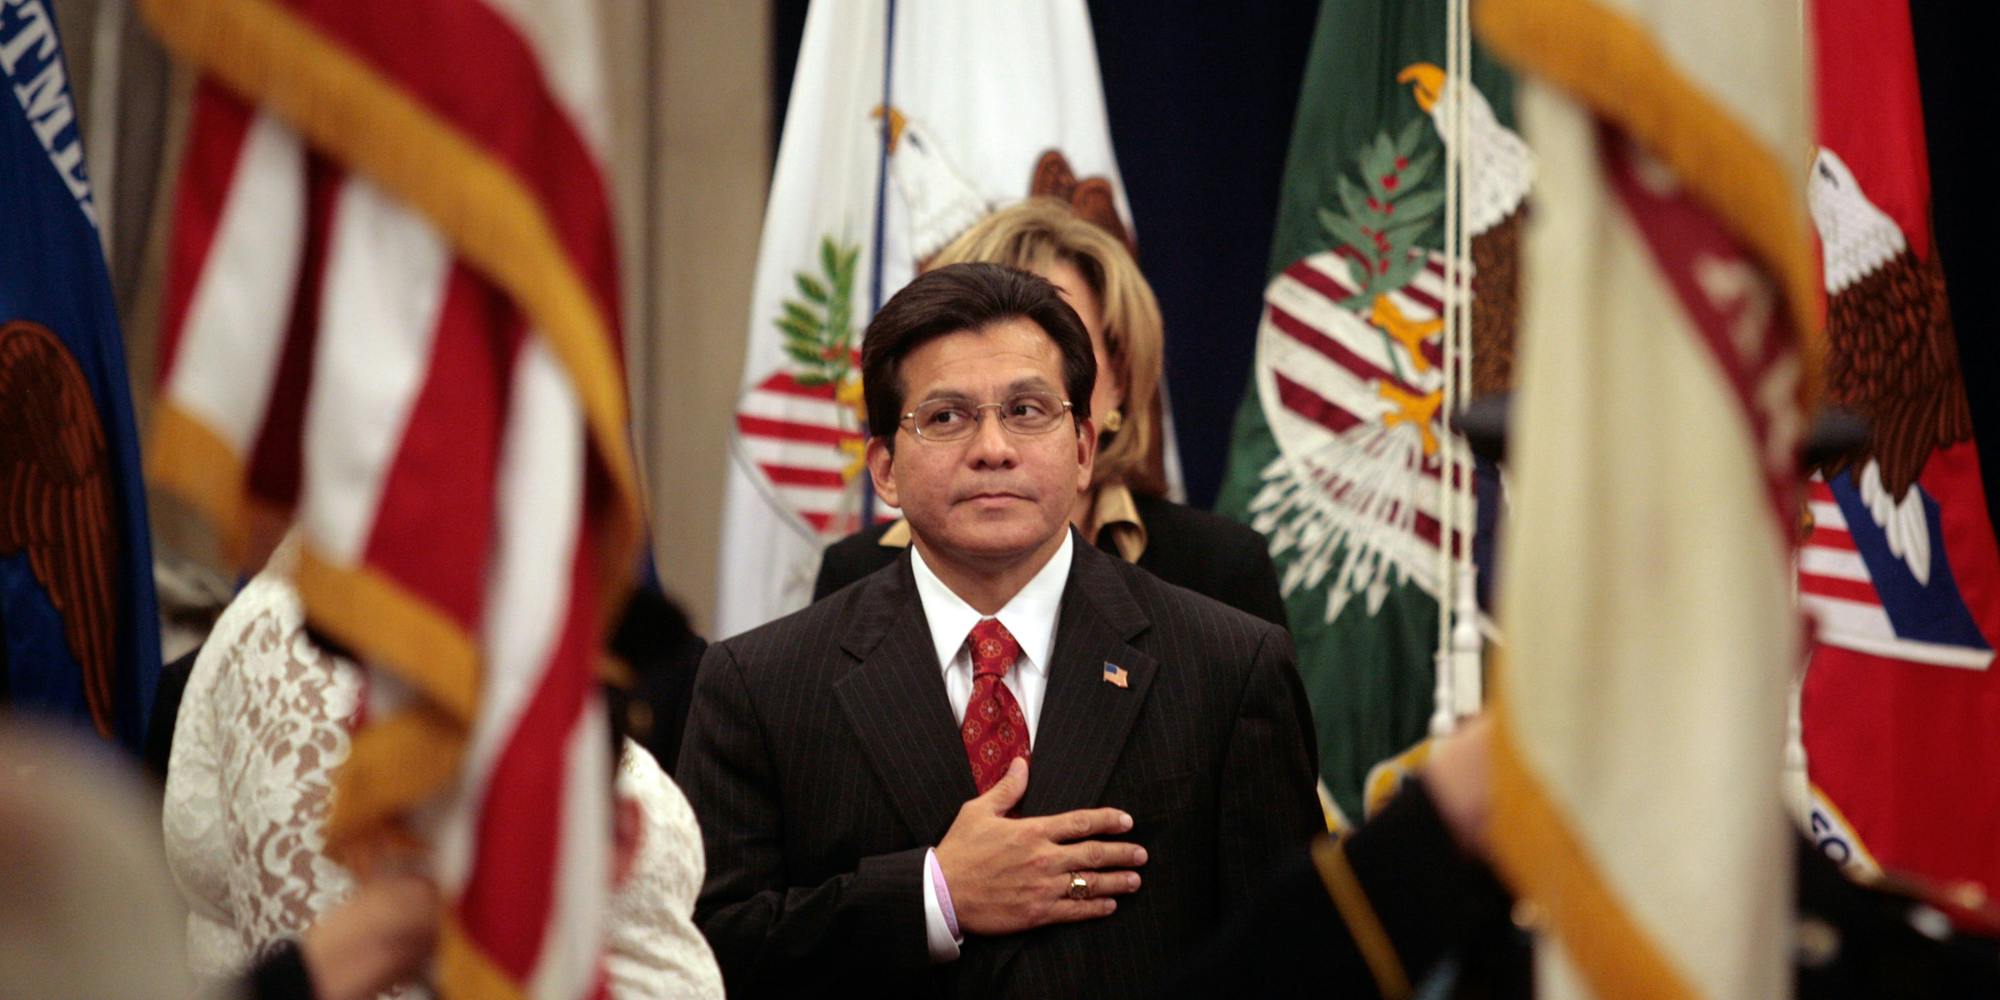 General Alberto Gonzales calls out jeff sessions for marijuana stance